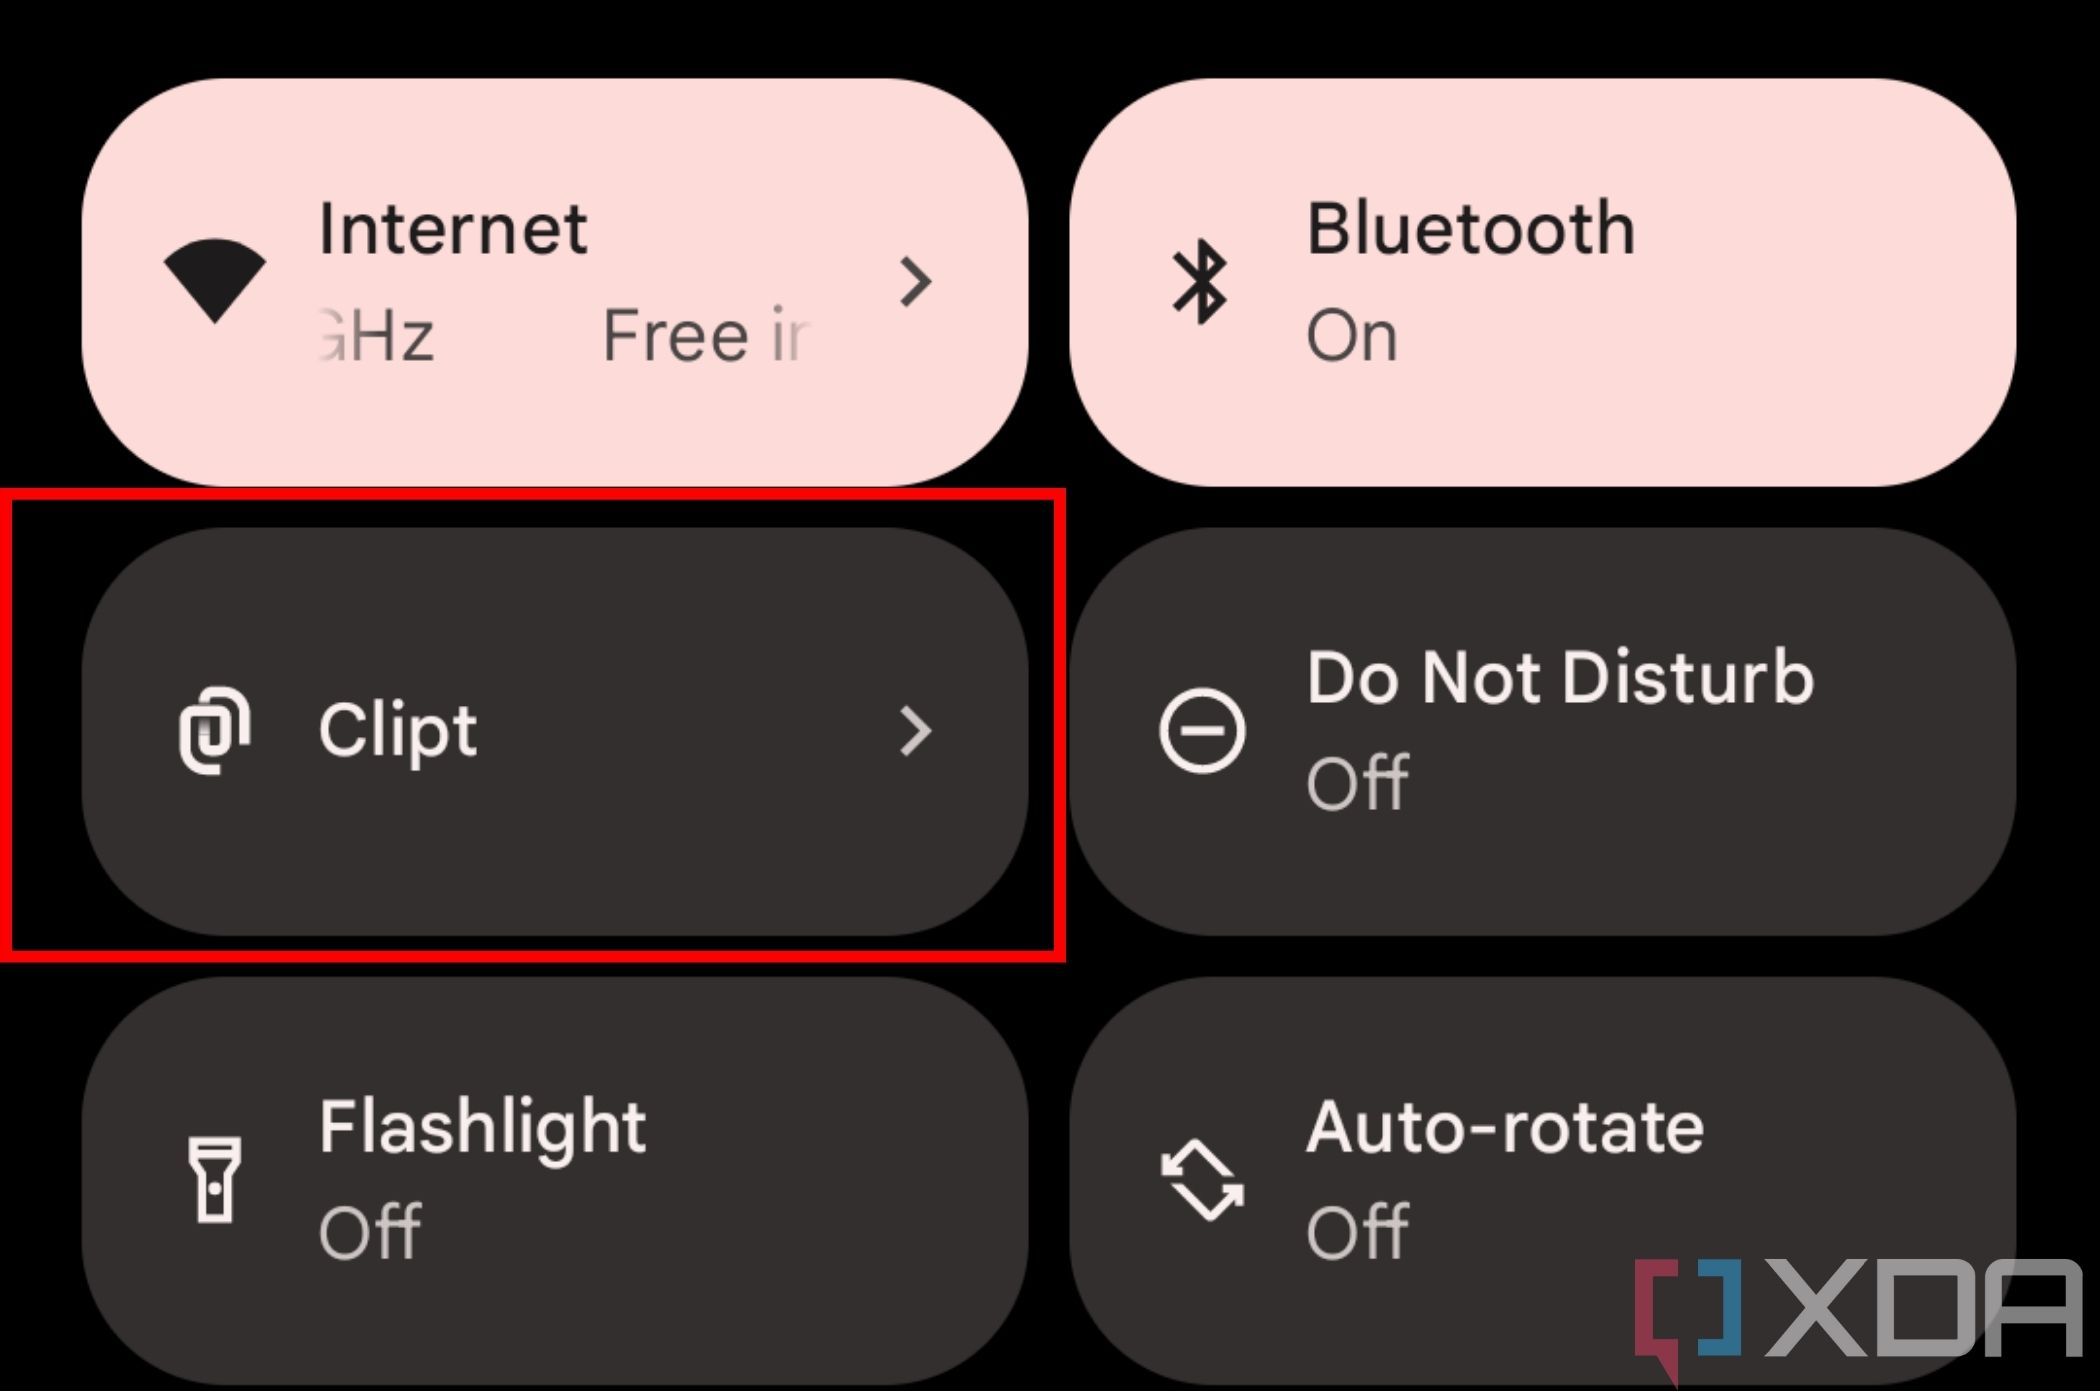 An image showing the screenshot of the quick settings menu on Android.